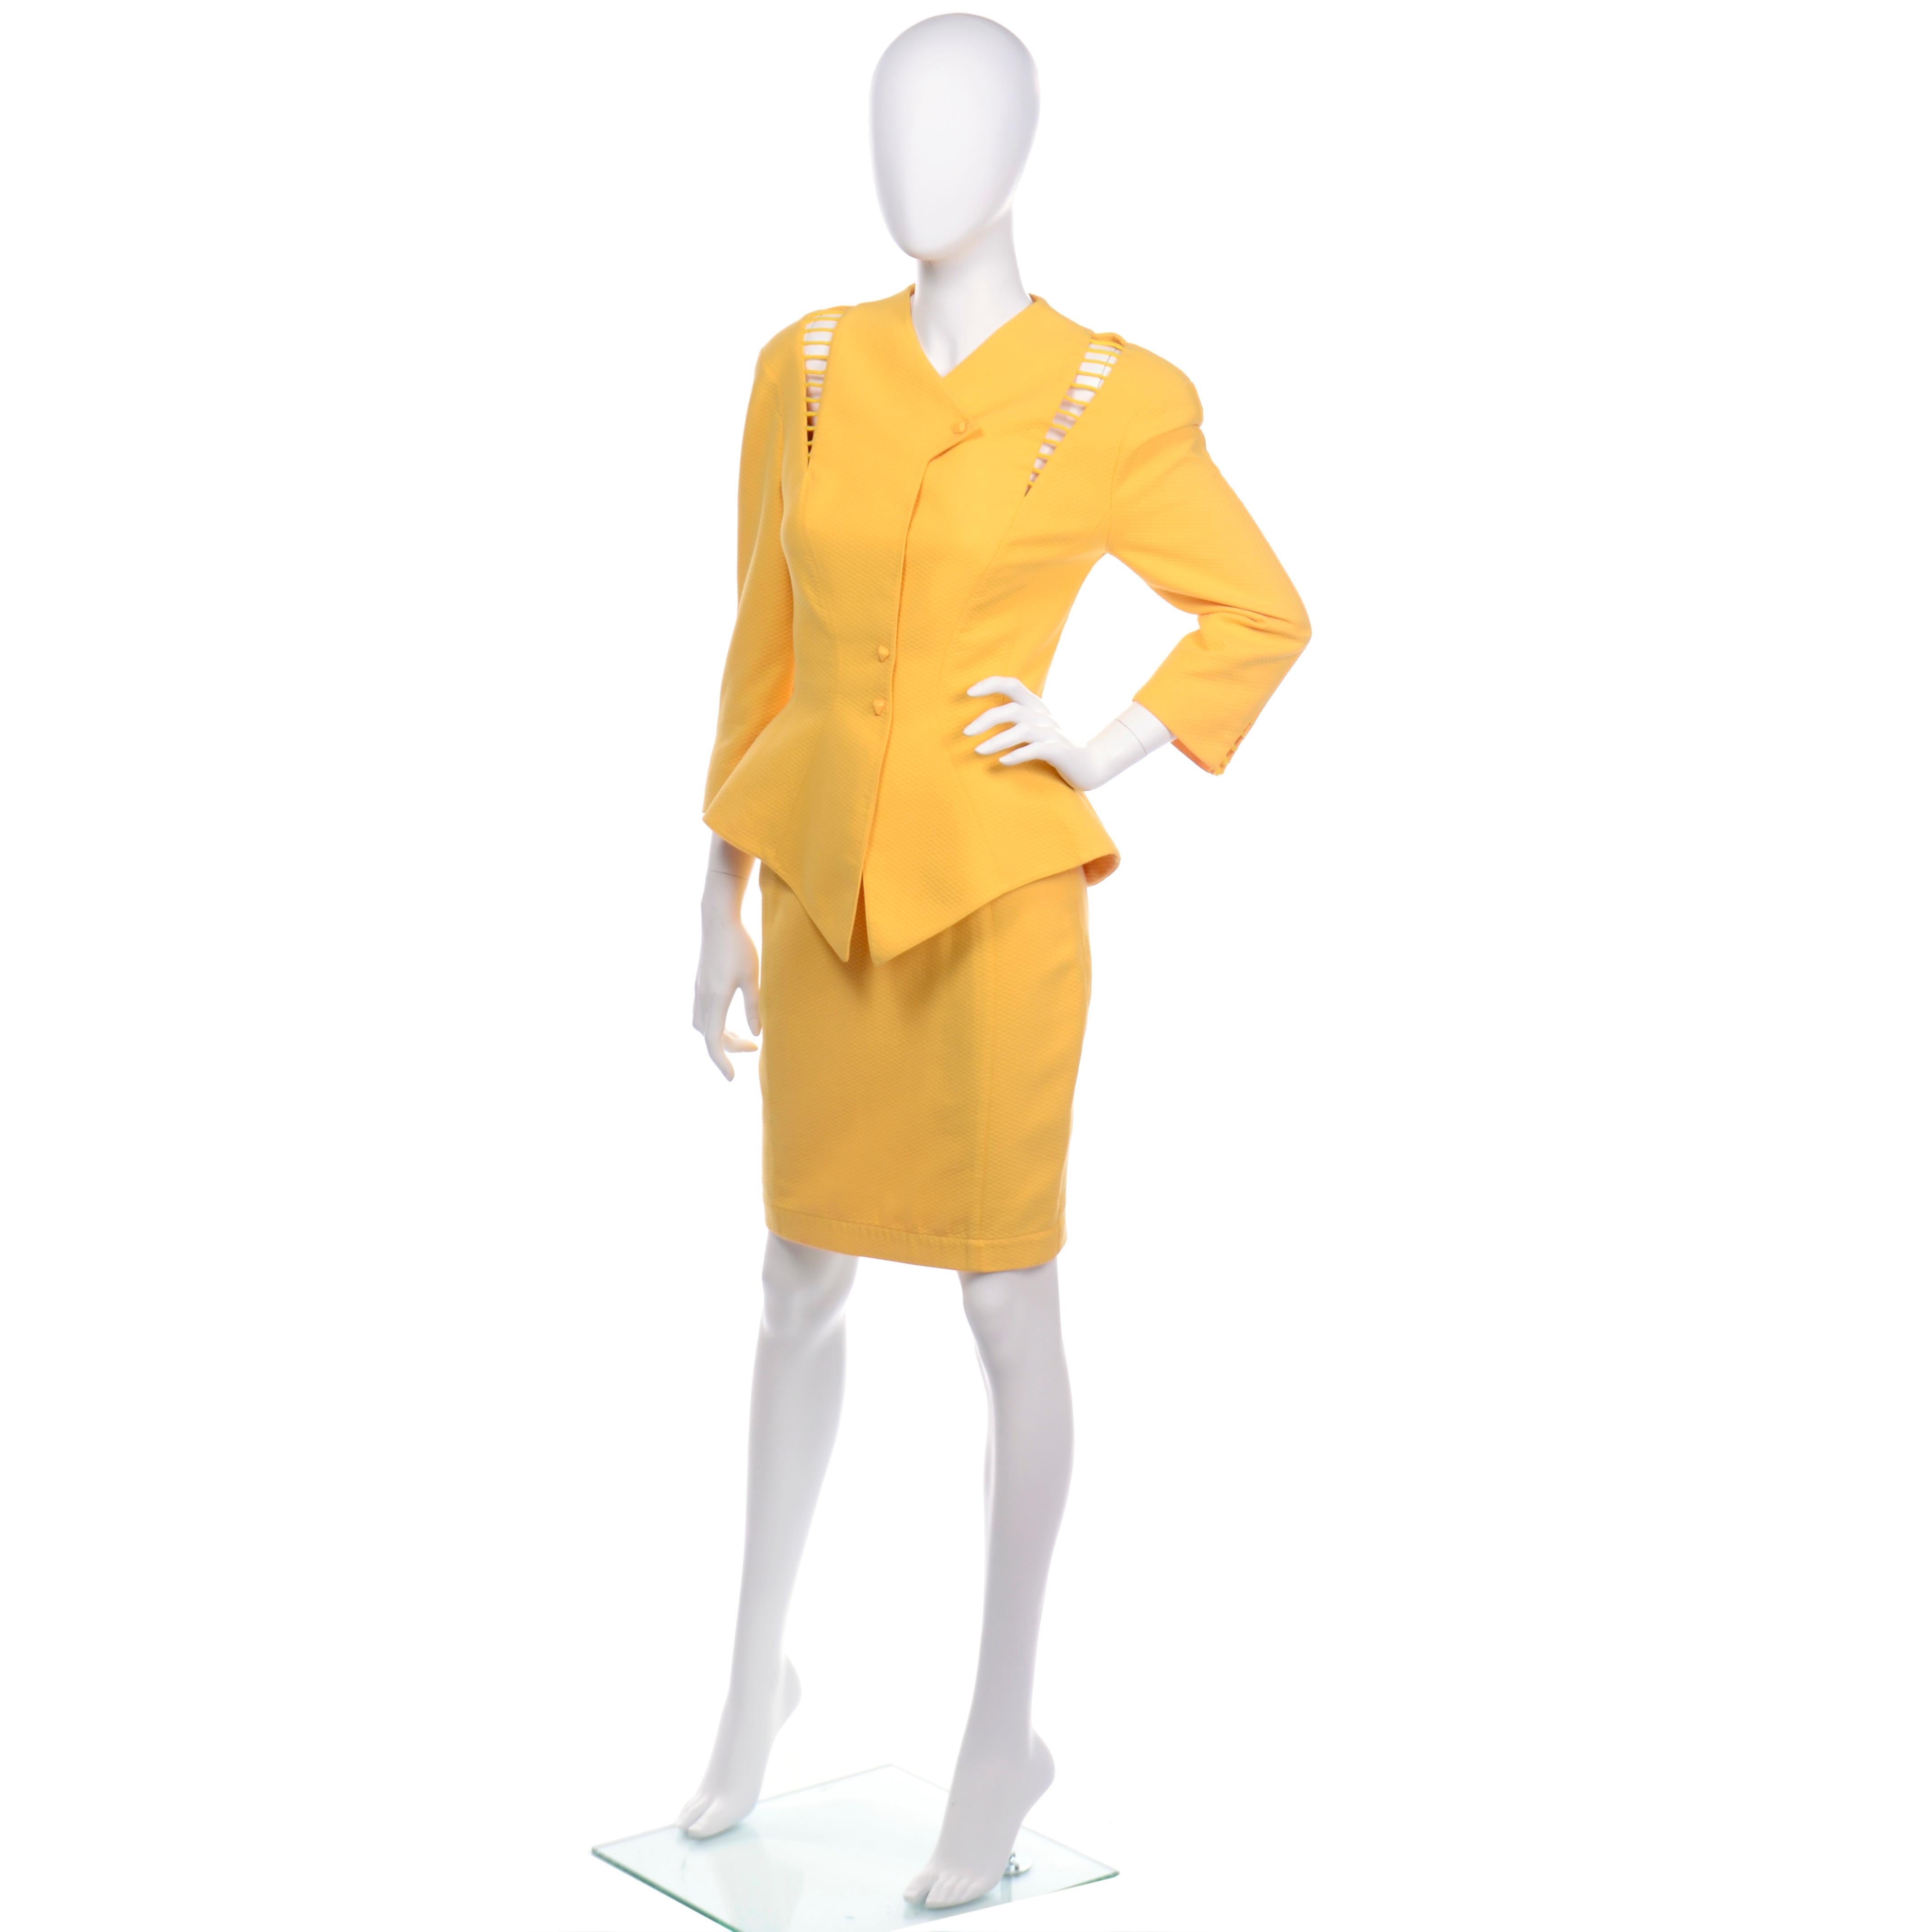 This is an iconic Thierry Mugler skirt suit in a marigold or yellow marigold pique . The jacket is fitted in the dramatic Mugler peplum style and it has incredible cutwork near the shoulders on both sides and on the cuffs. The jacket is fully lined